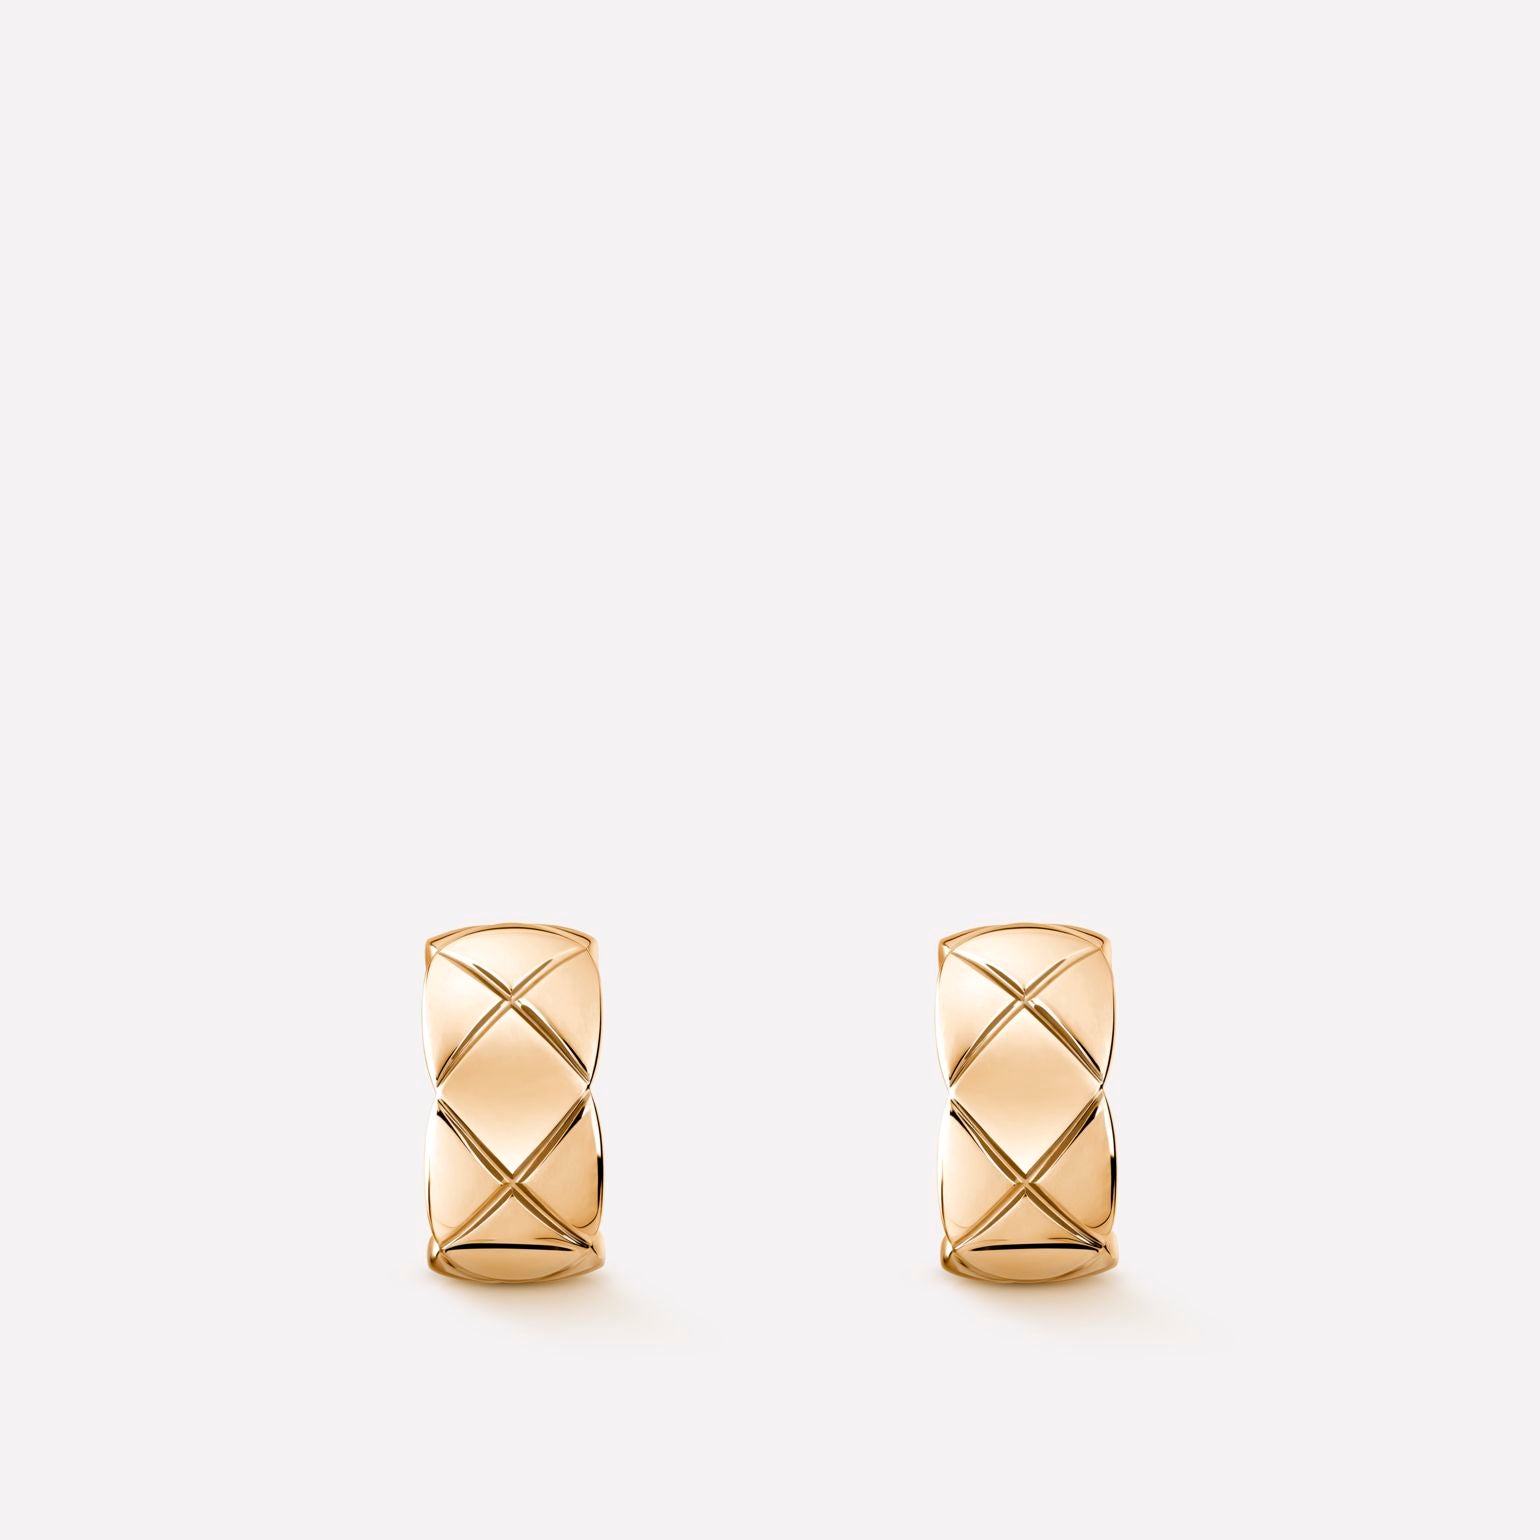 COCO EARRINGS QUILTED MOTIF, 18K BEIGE GOLD